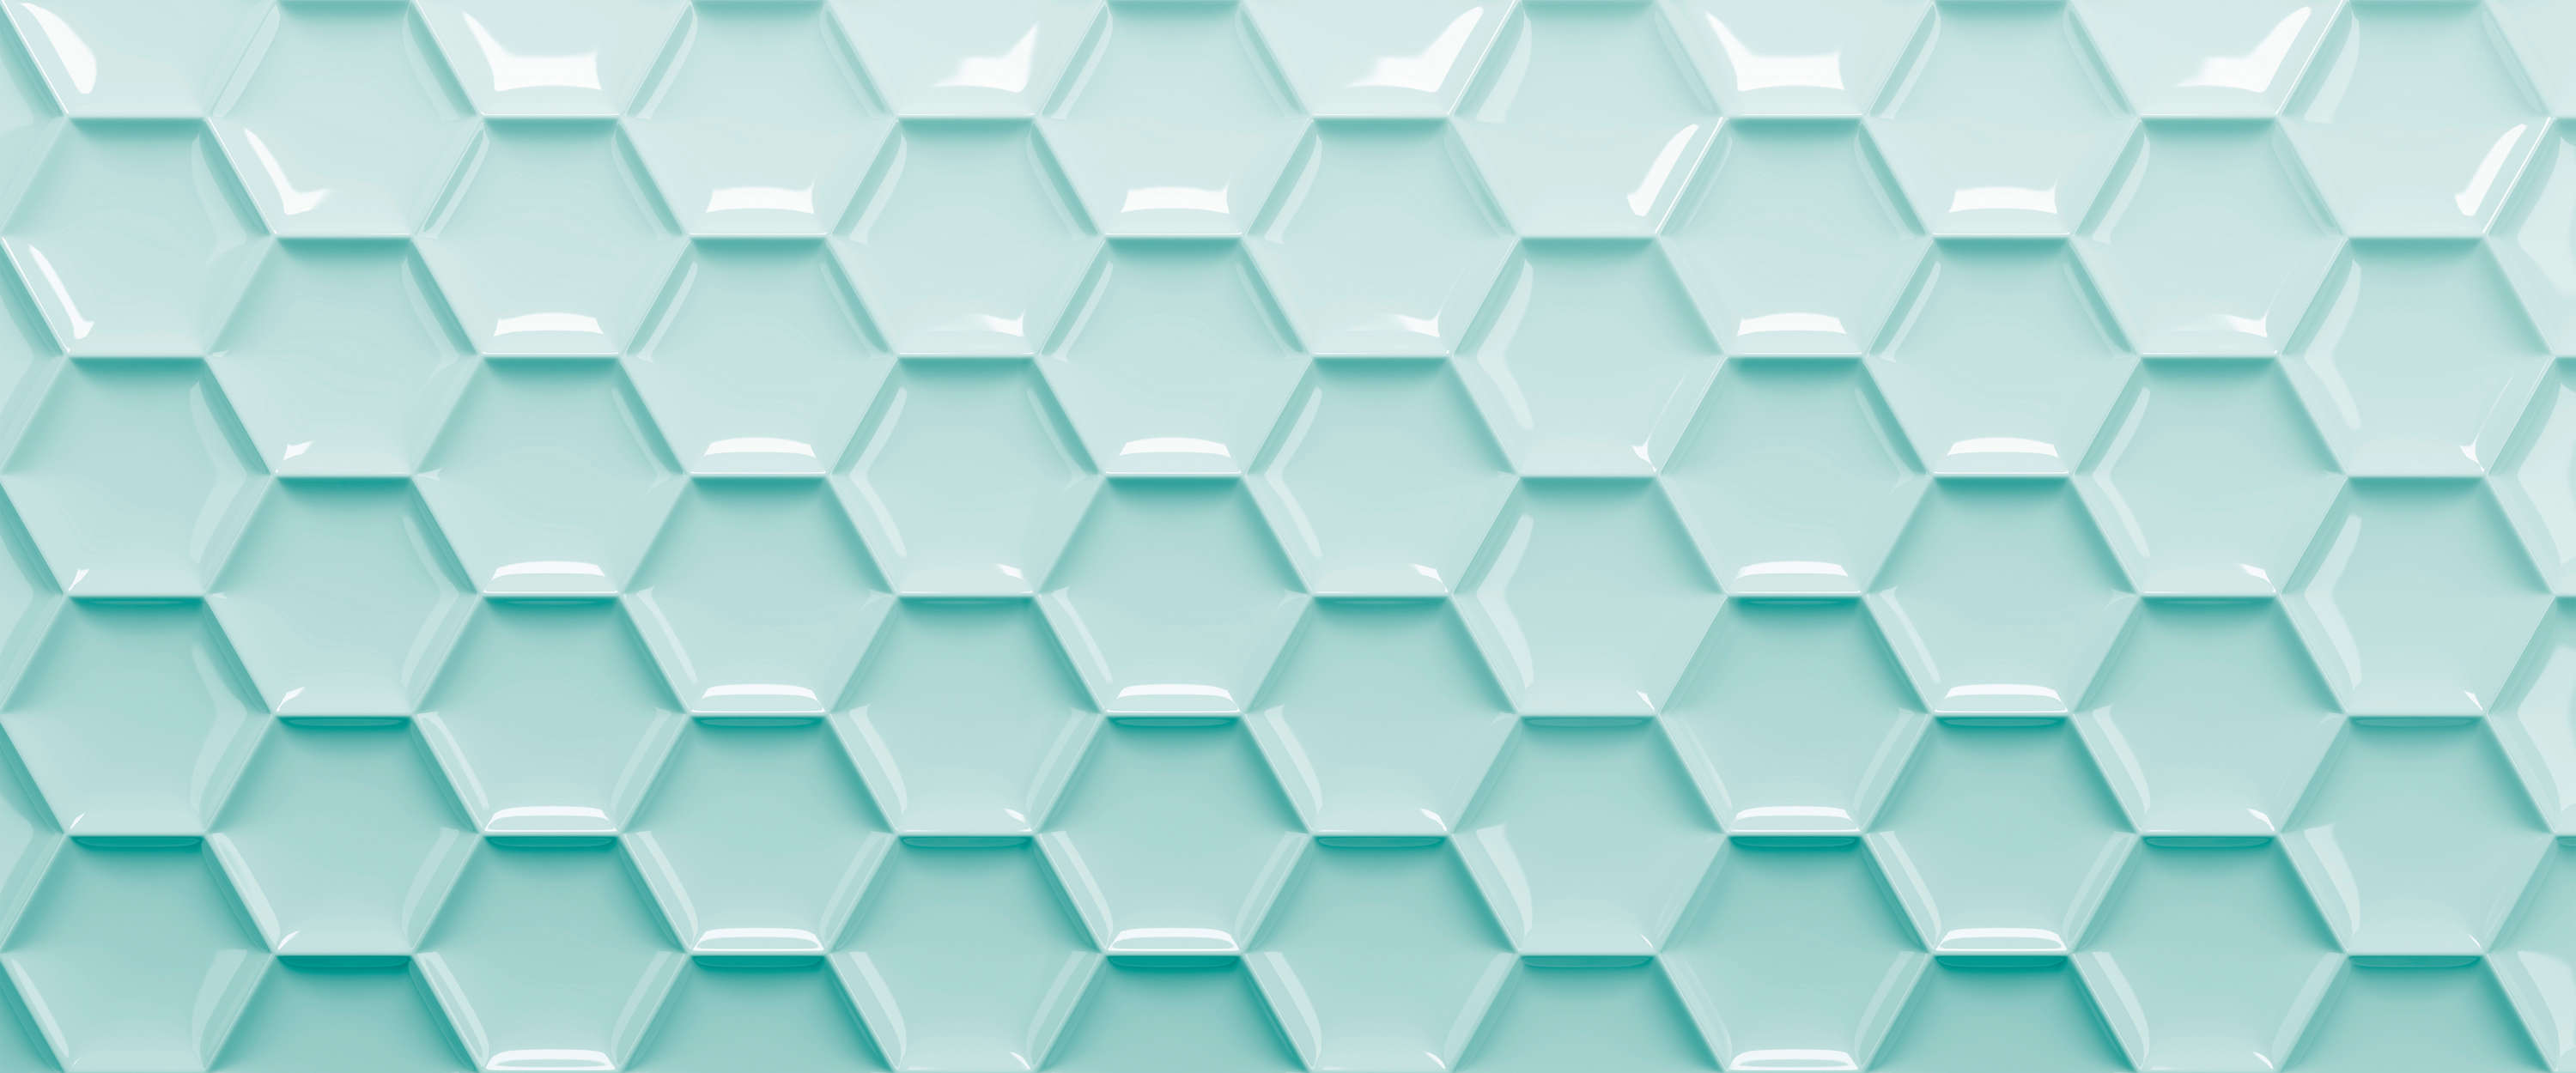             Graphic mural 3D plastic honeycomb in mint green
        